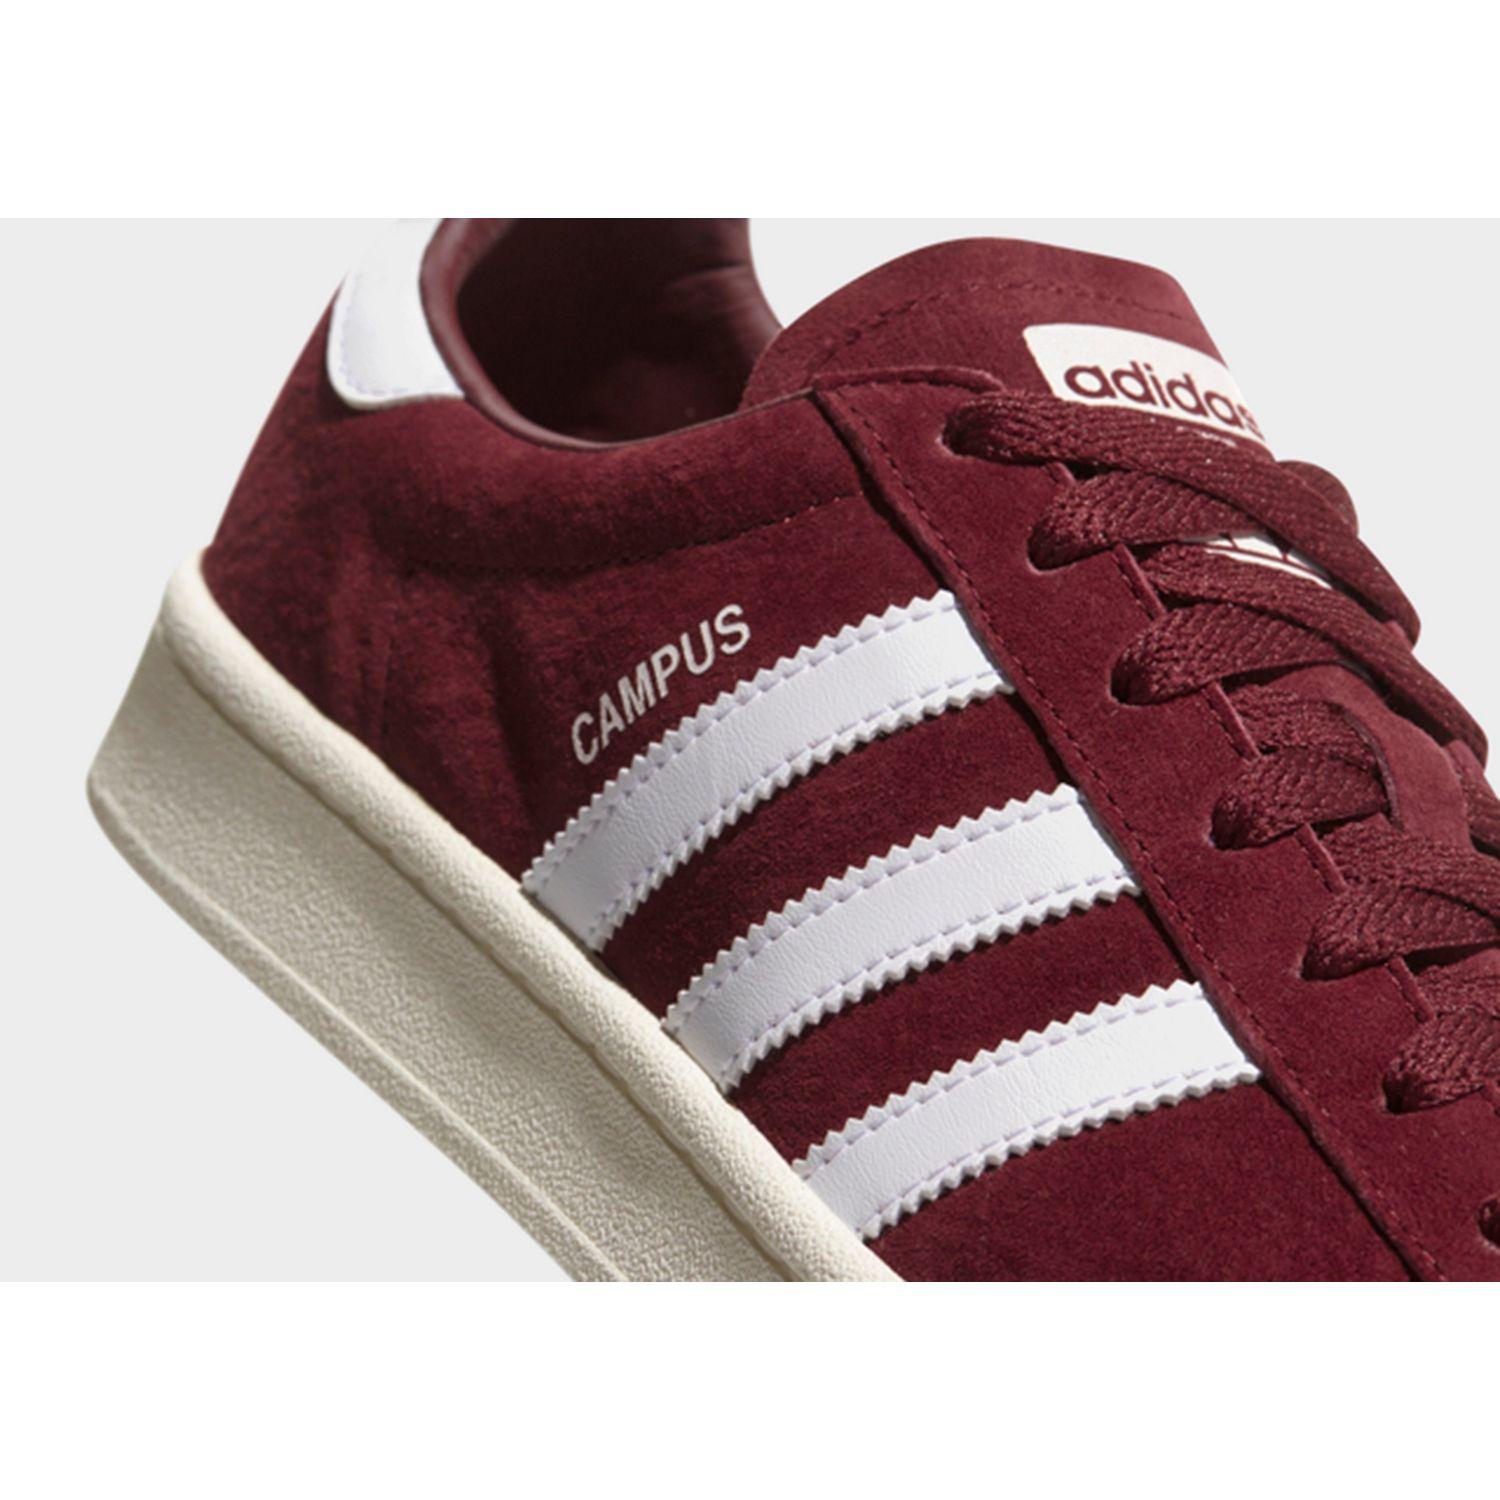 adidas Campus Shoes in Red - Lyst